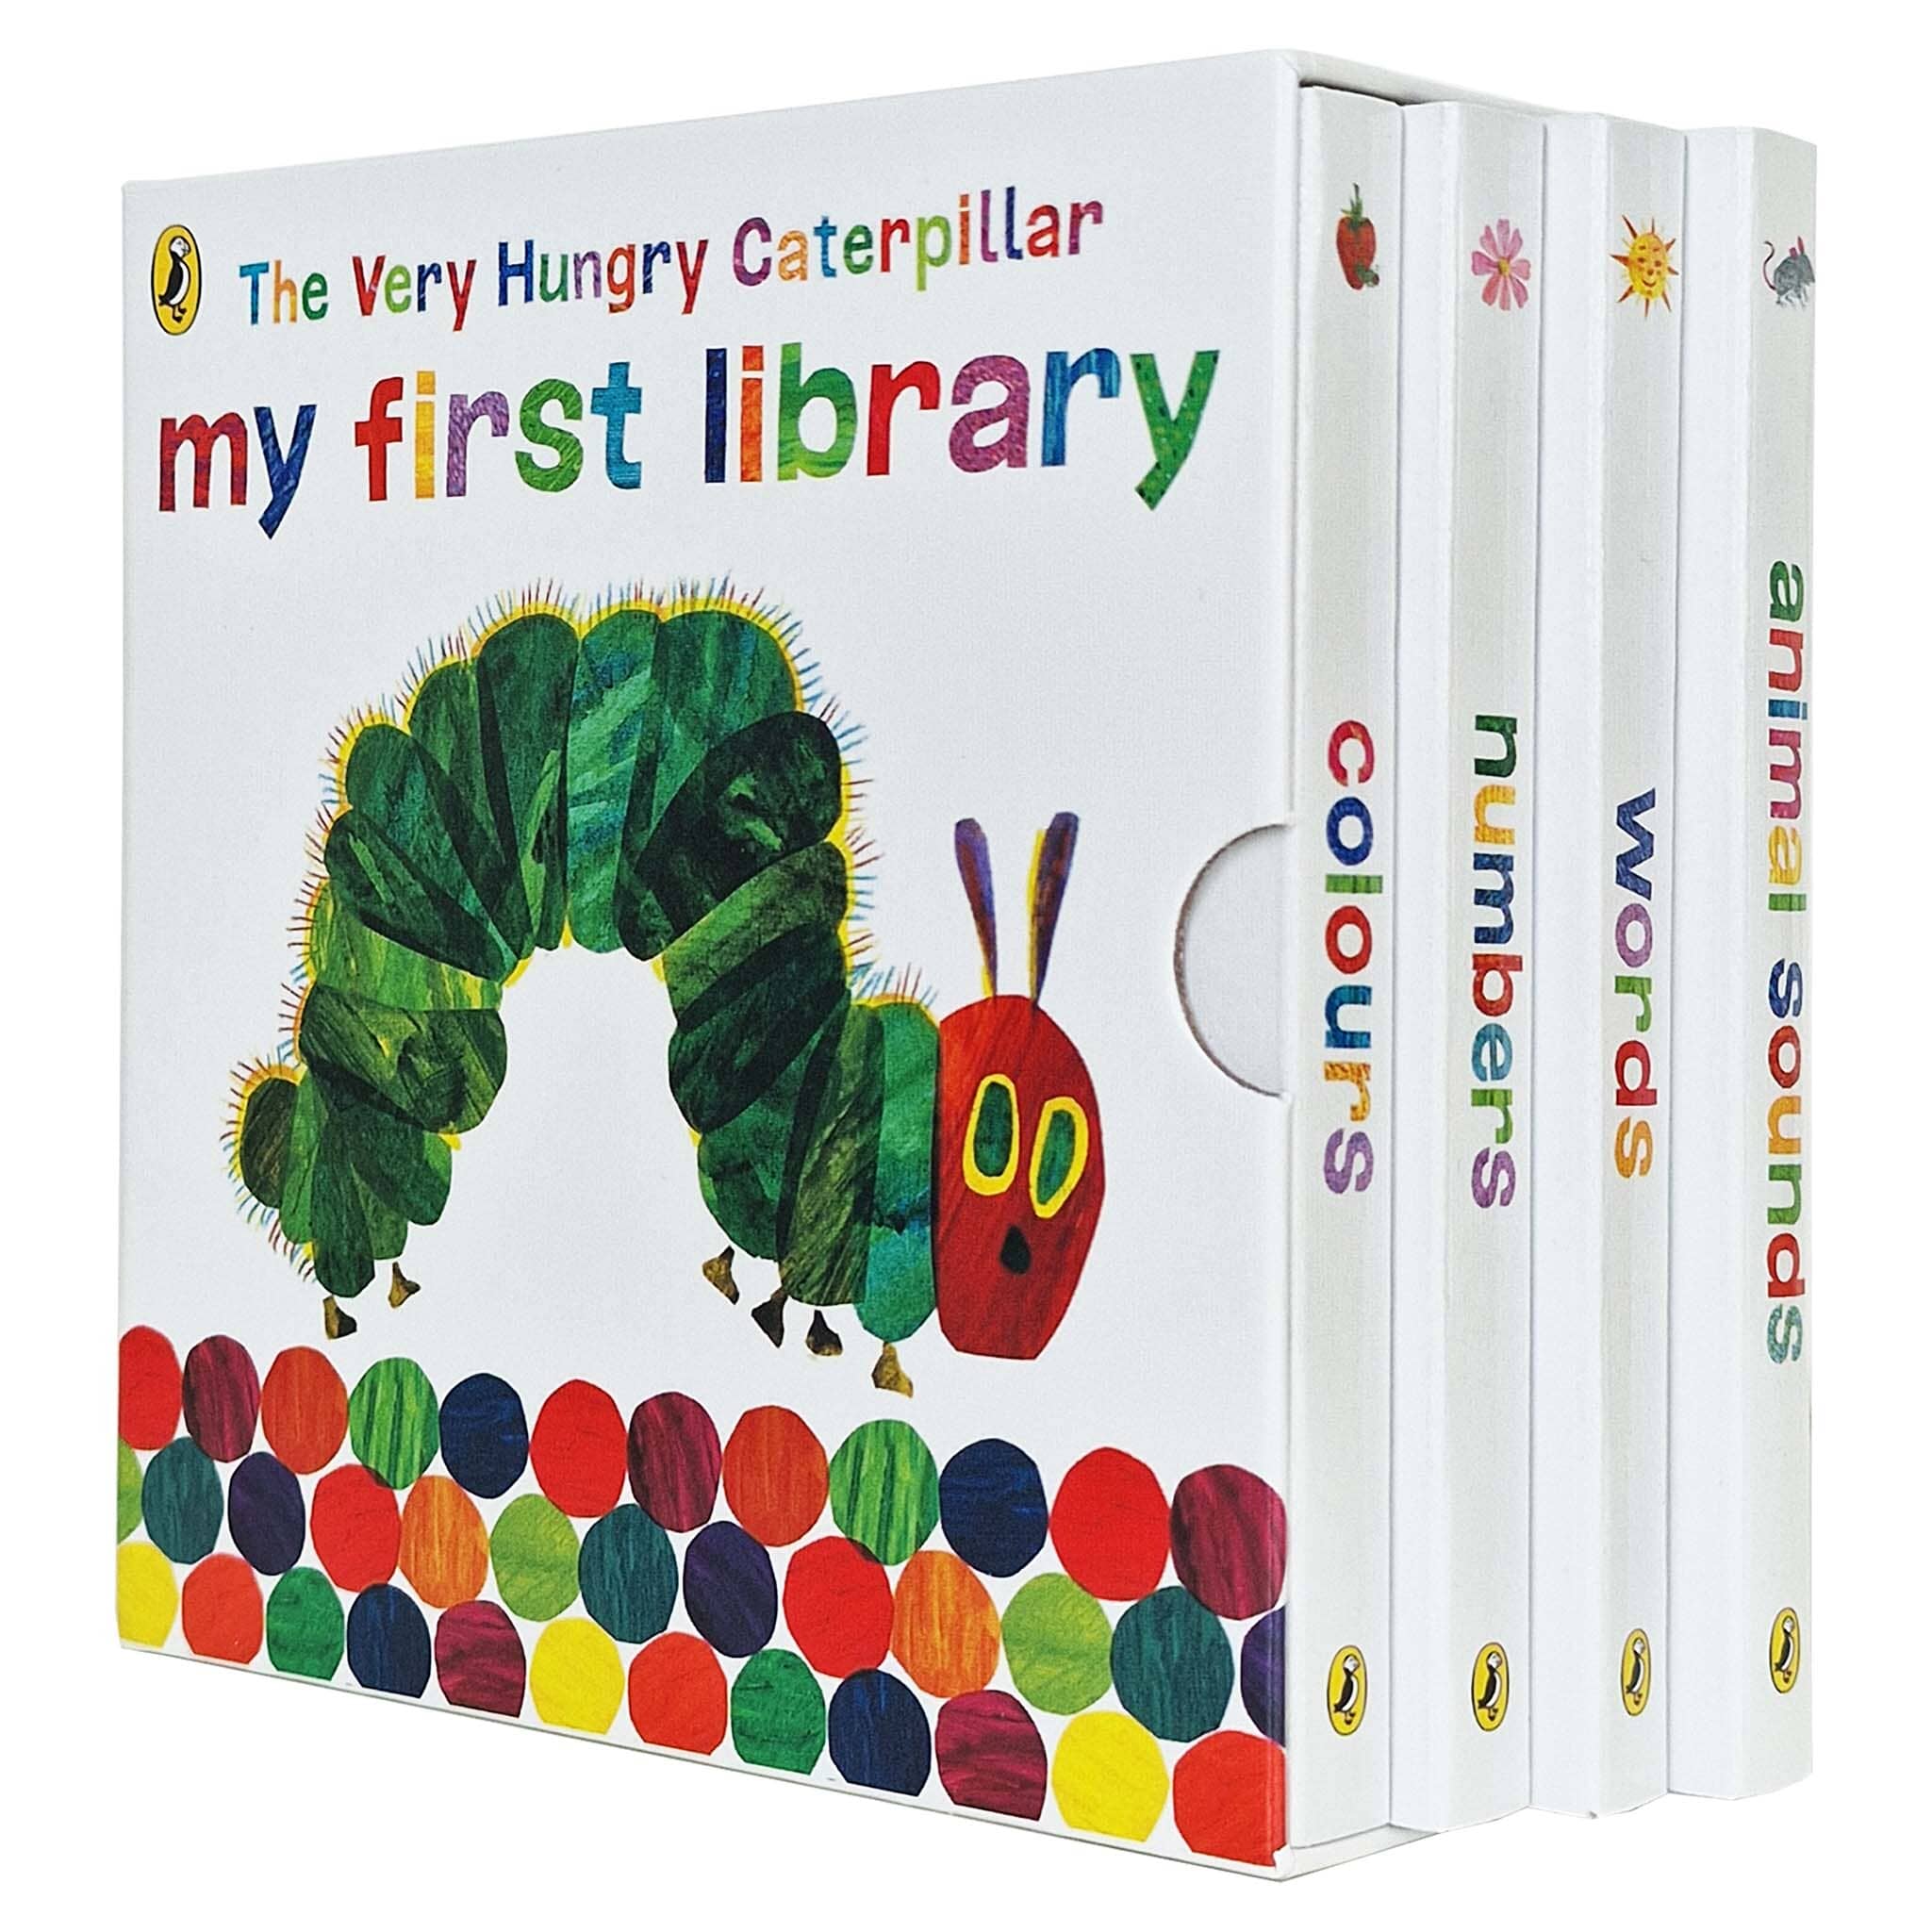 The Very Hungry Caterpillar - My First Library (4 Books)